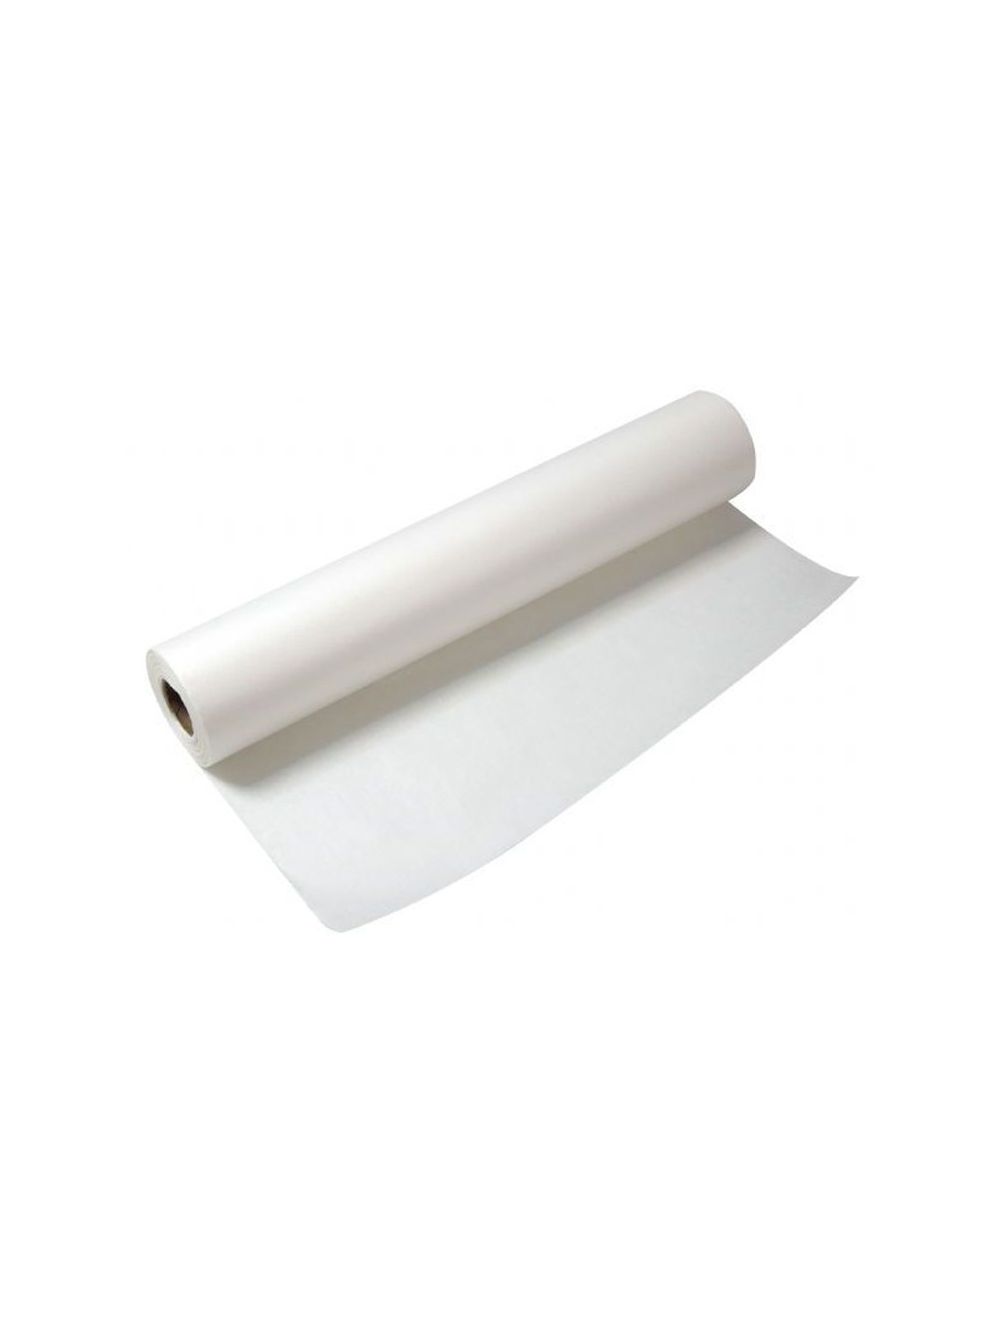 Bienfang 106 White Sketching and Tracing Roll 18 x 50 Yards